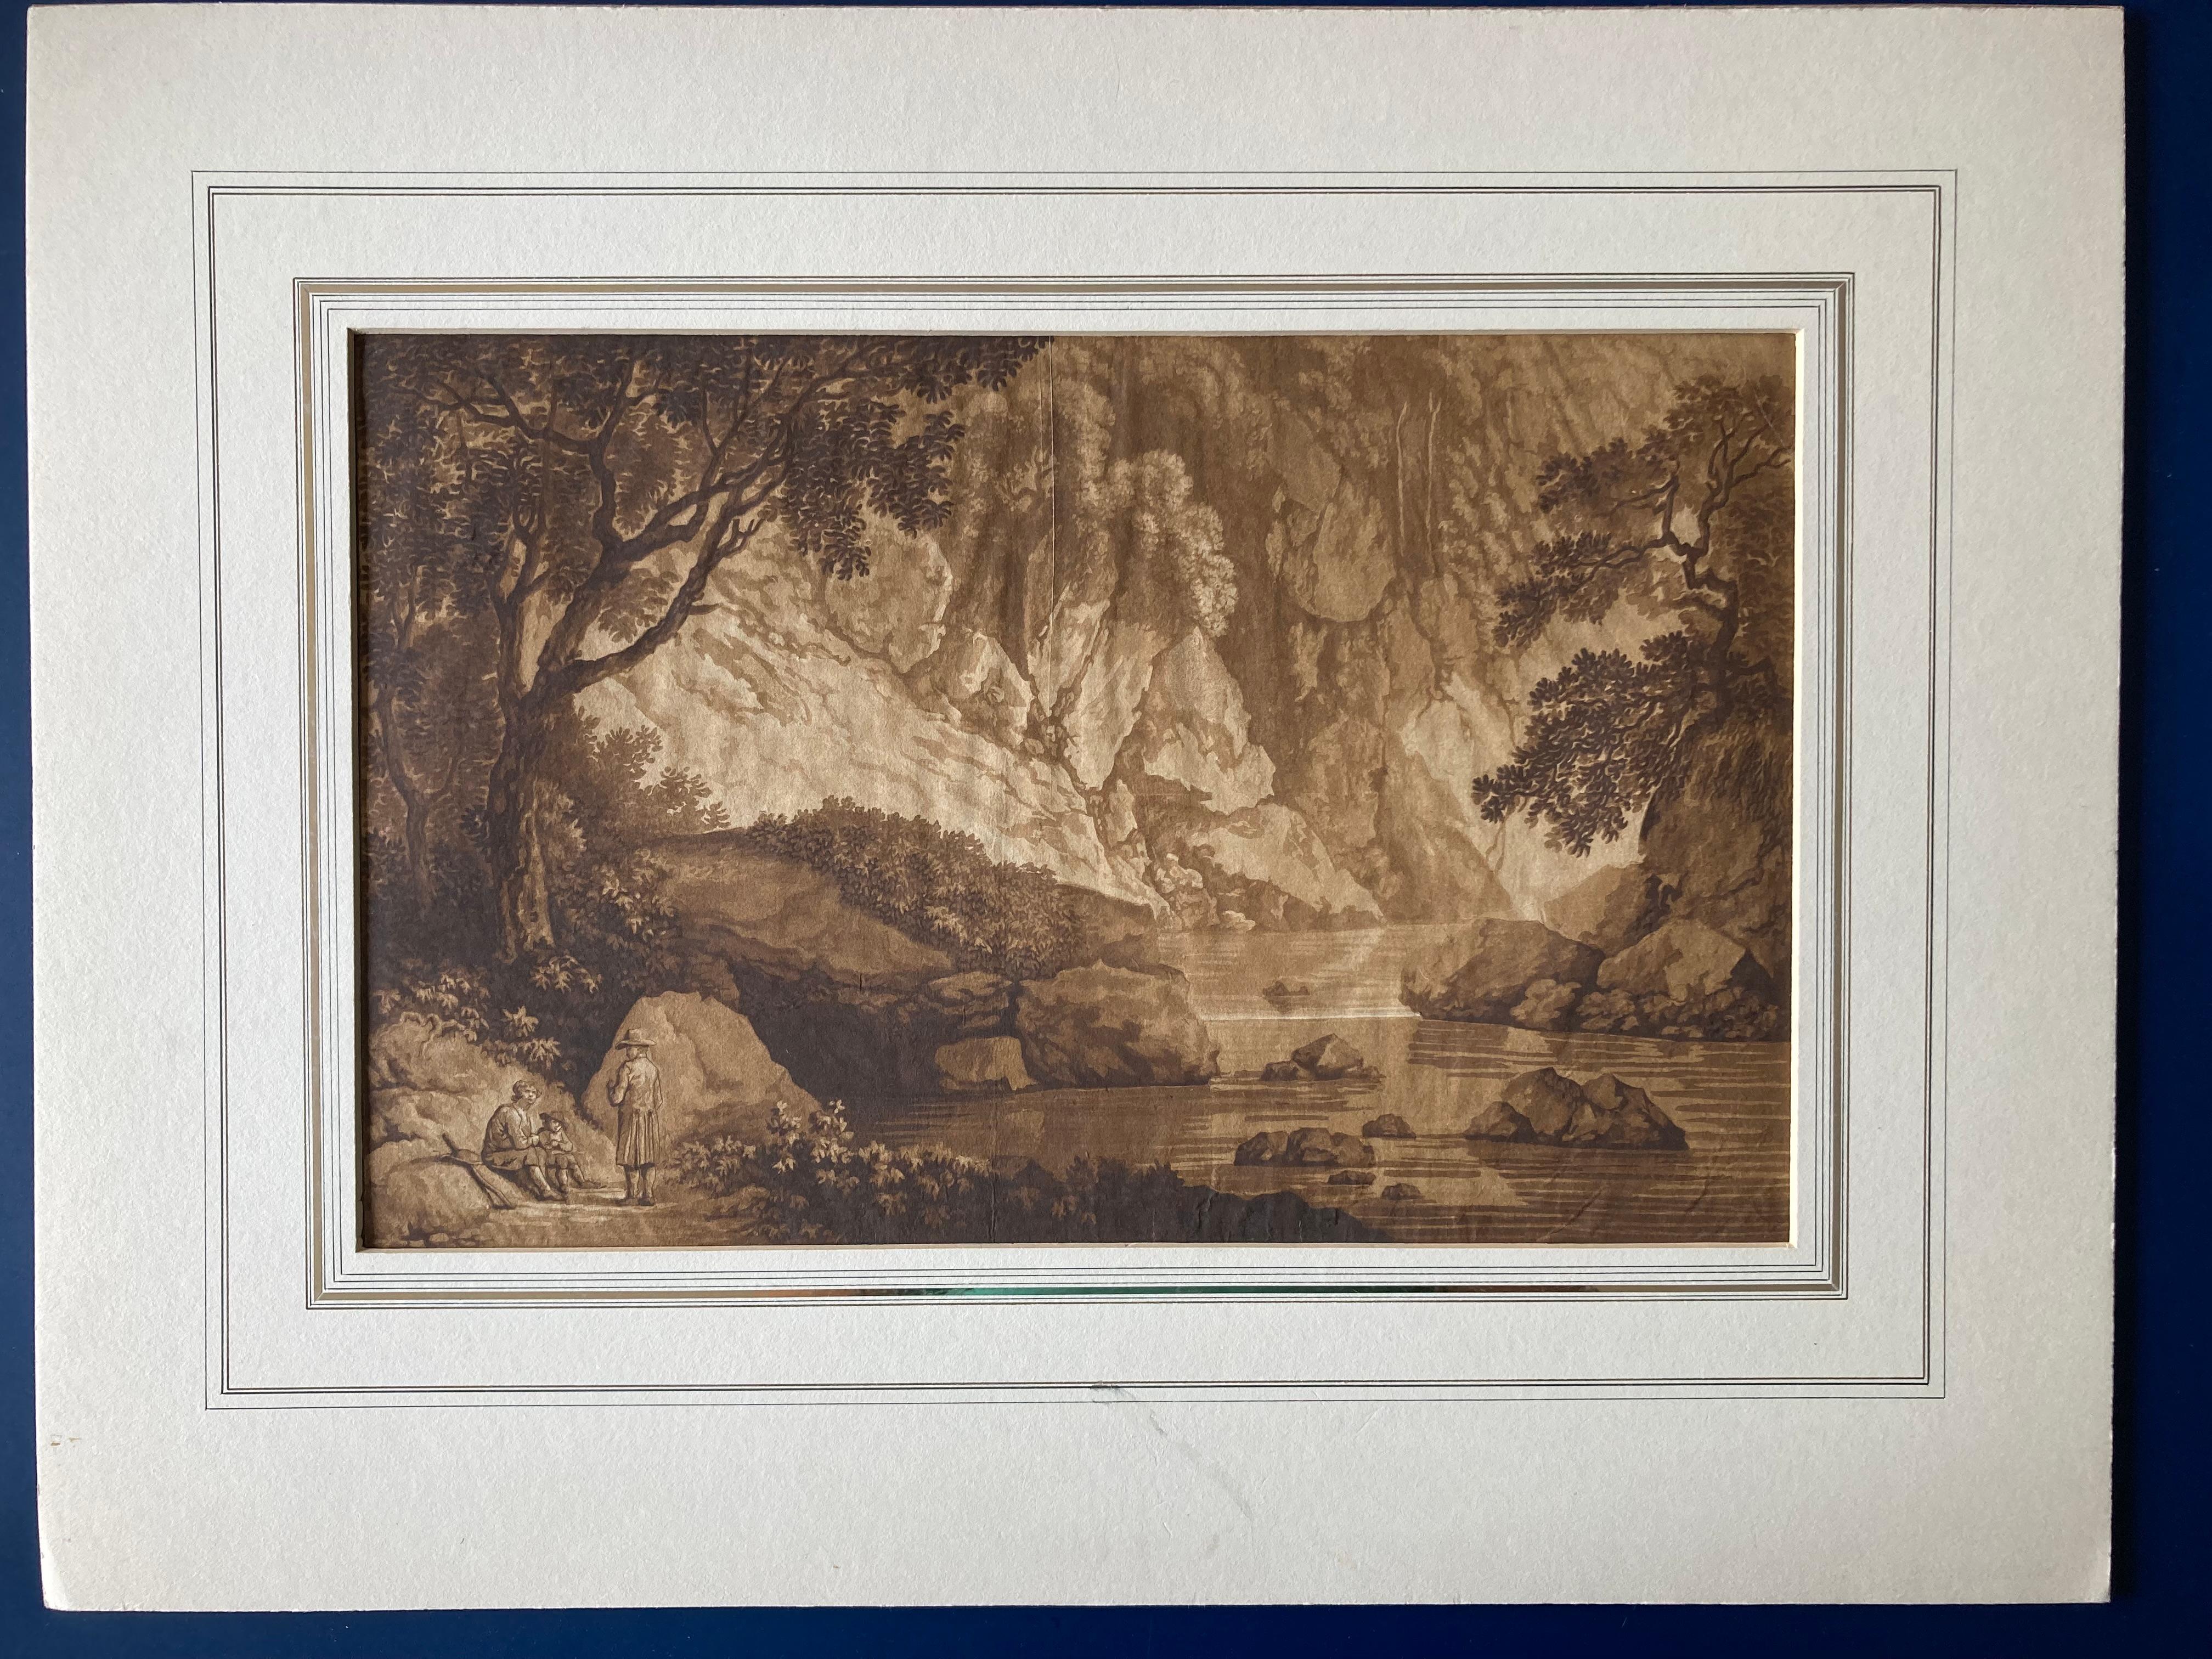 German or Swiss School, probably Circle of Christoph Nathe (1753-1808)), around 1800; beautiful old master drawing/ aquatint, inscribed 